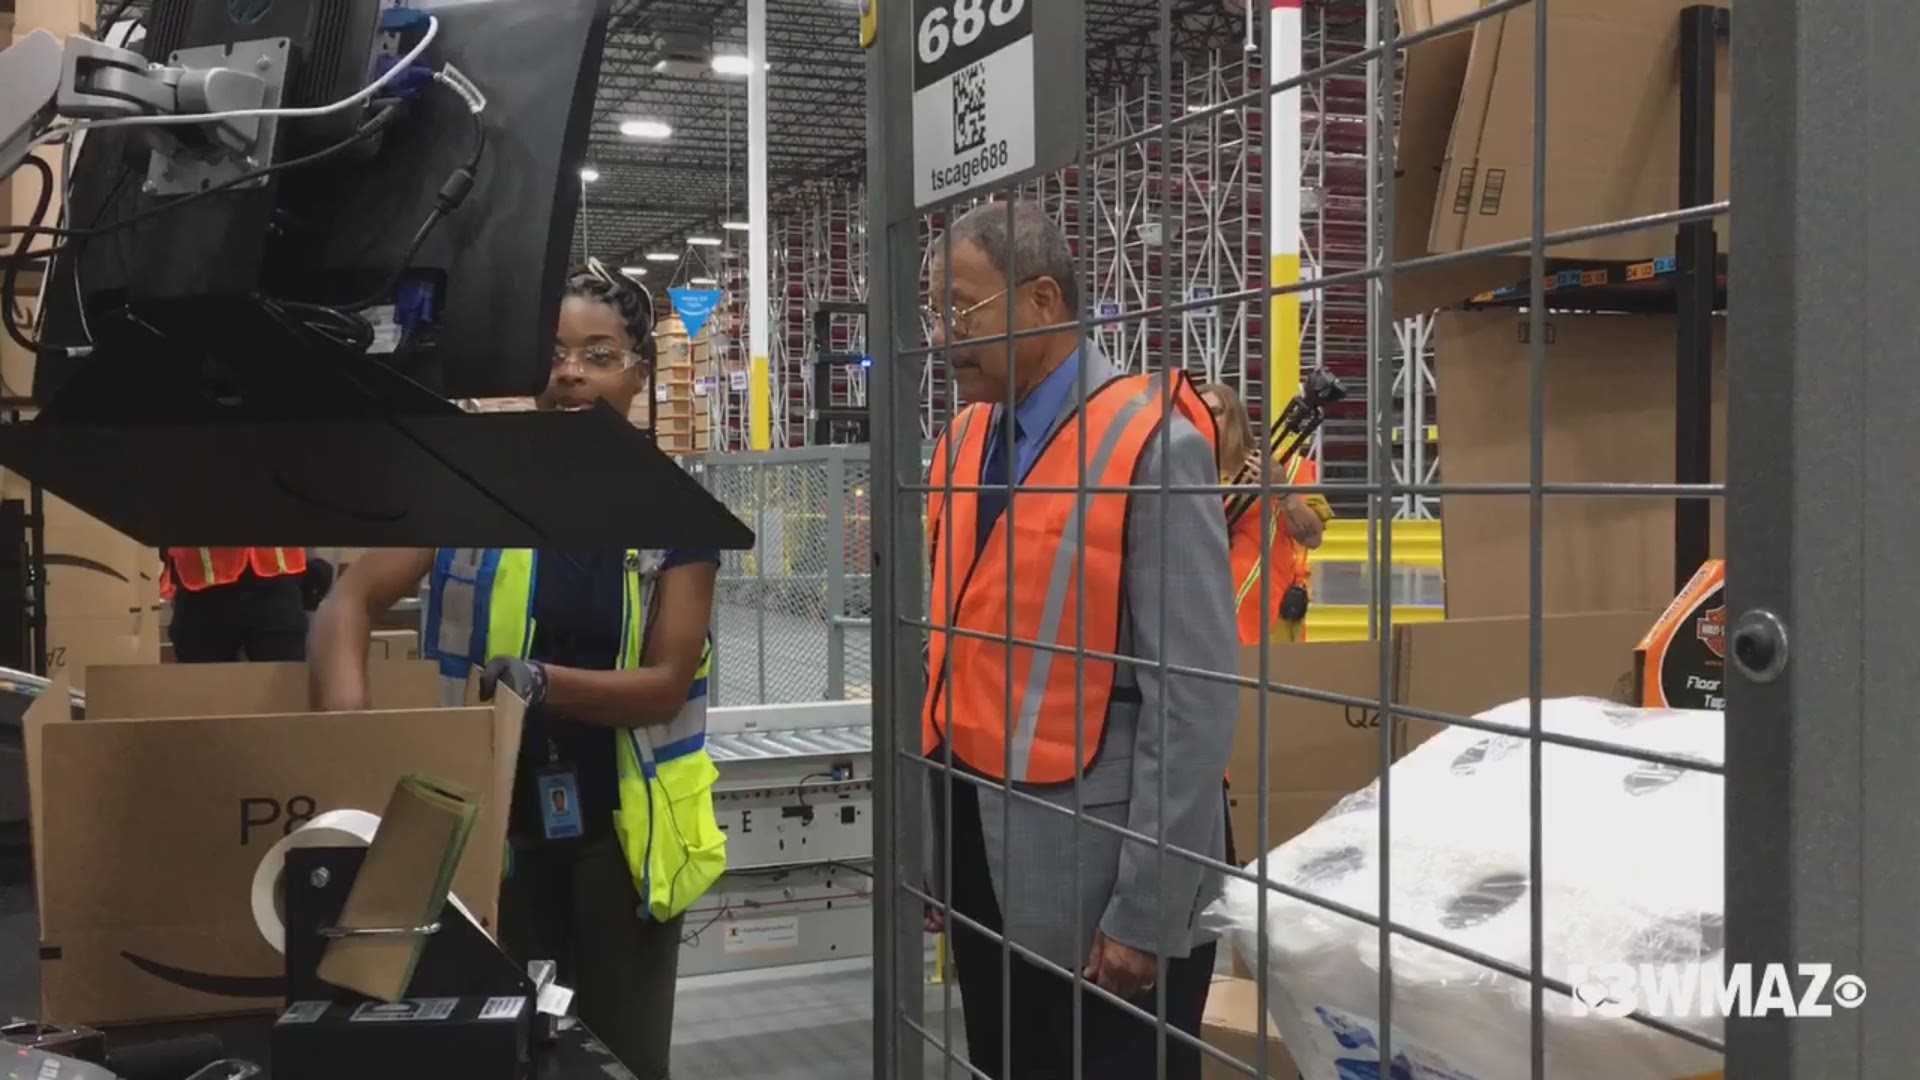 After months of waiting, the new Amazon fulfillment center has opened in south Bibb County. Here Congressman Bishop is taught by an employee on how to pack an Amazon box for shipping.